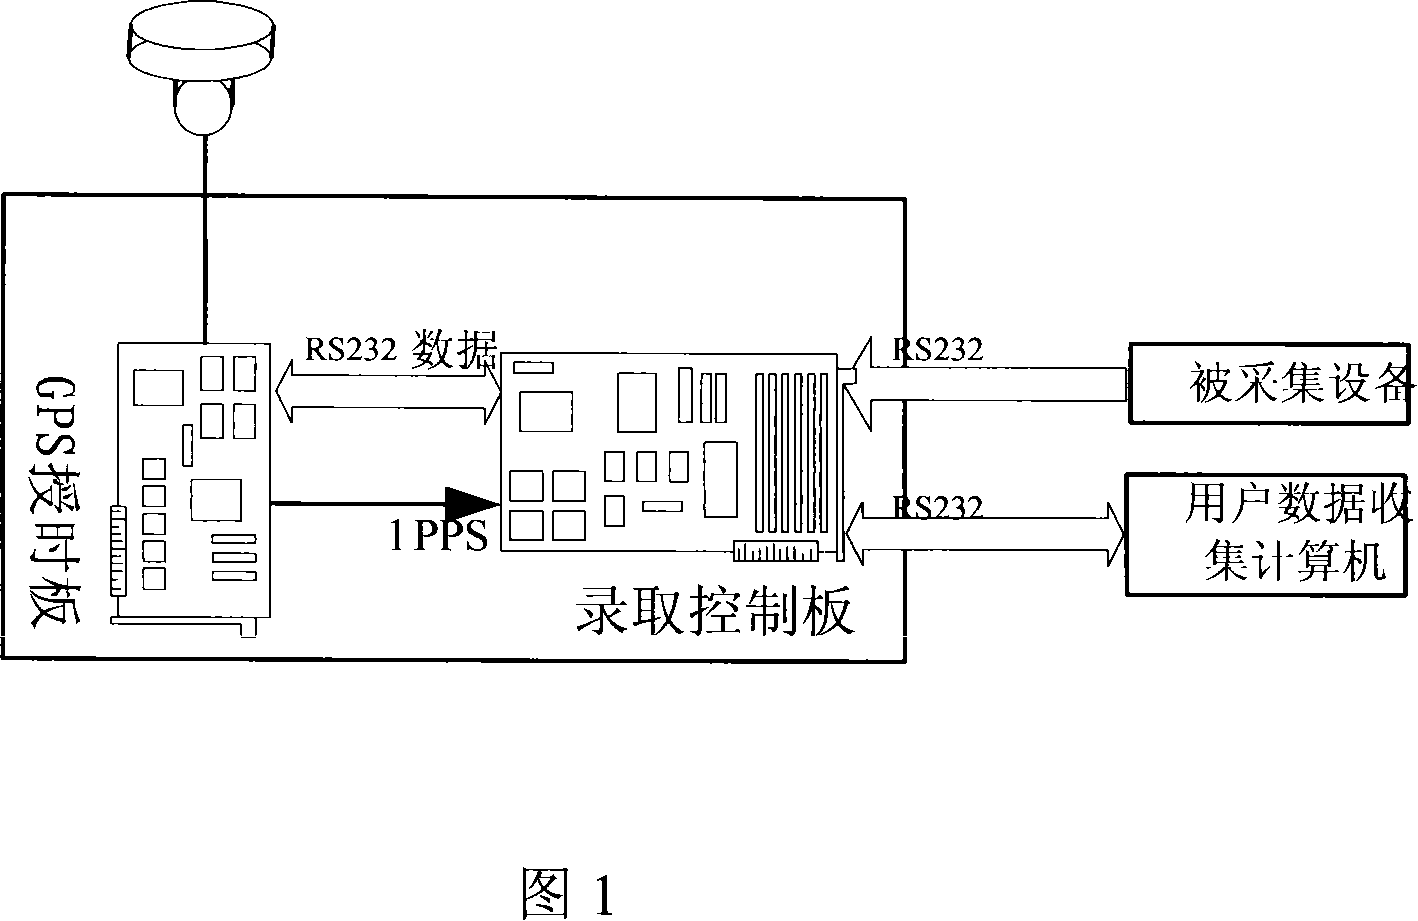 High-accuracy data receiving time service instrument